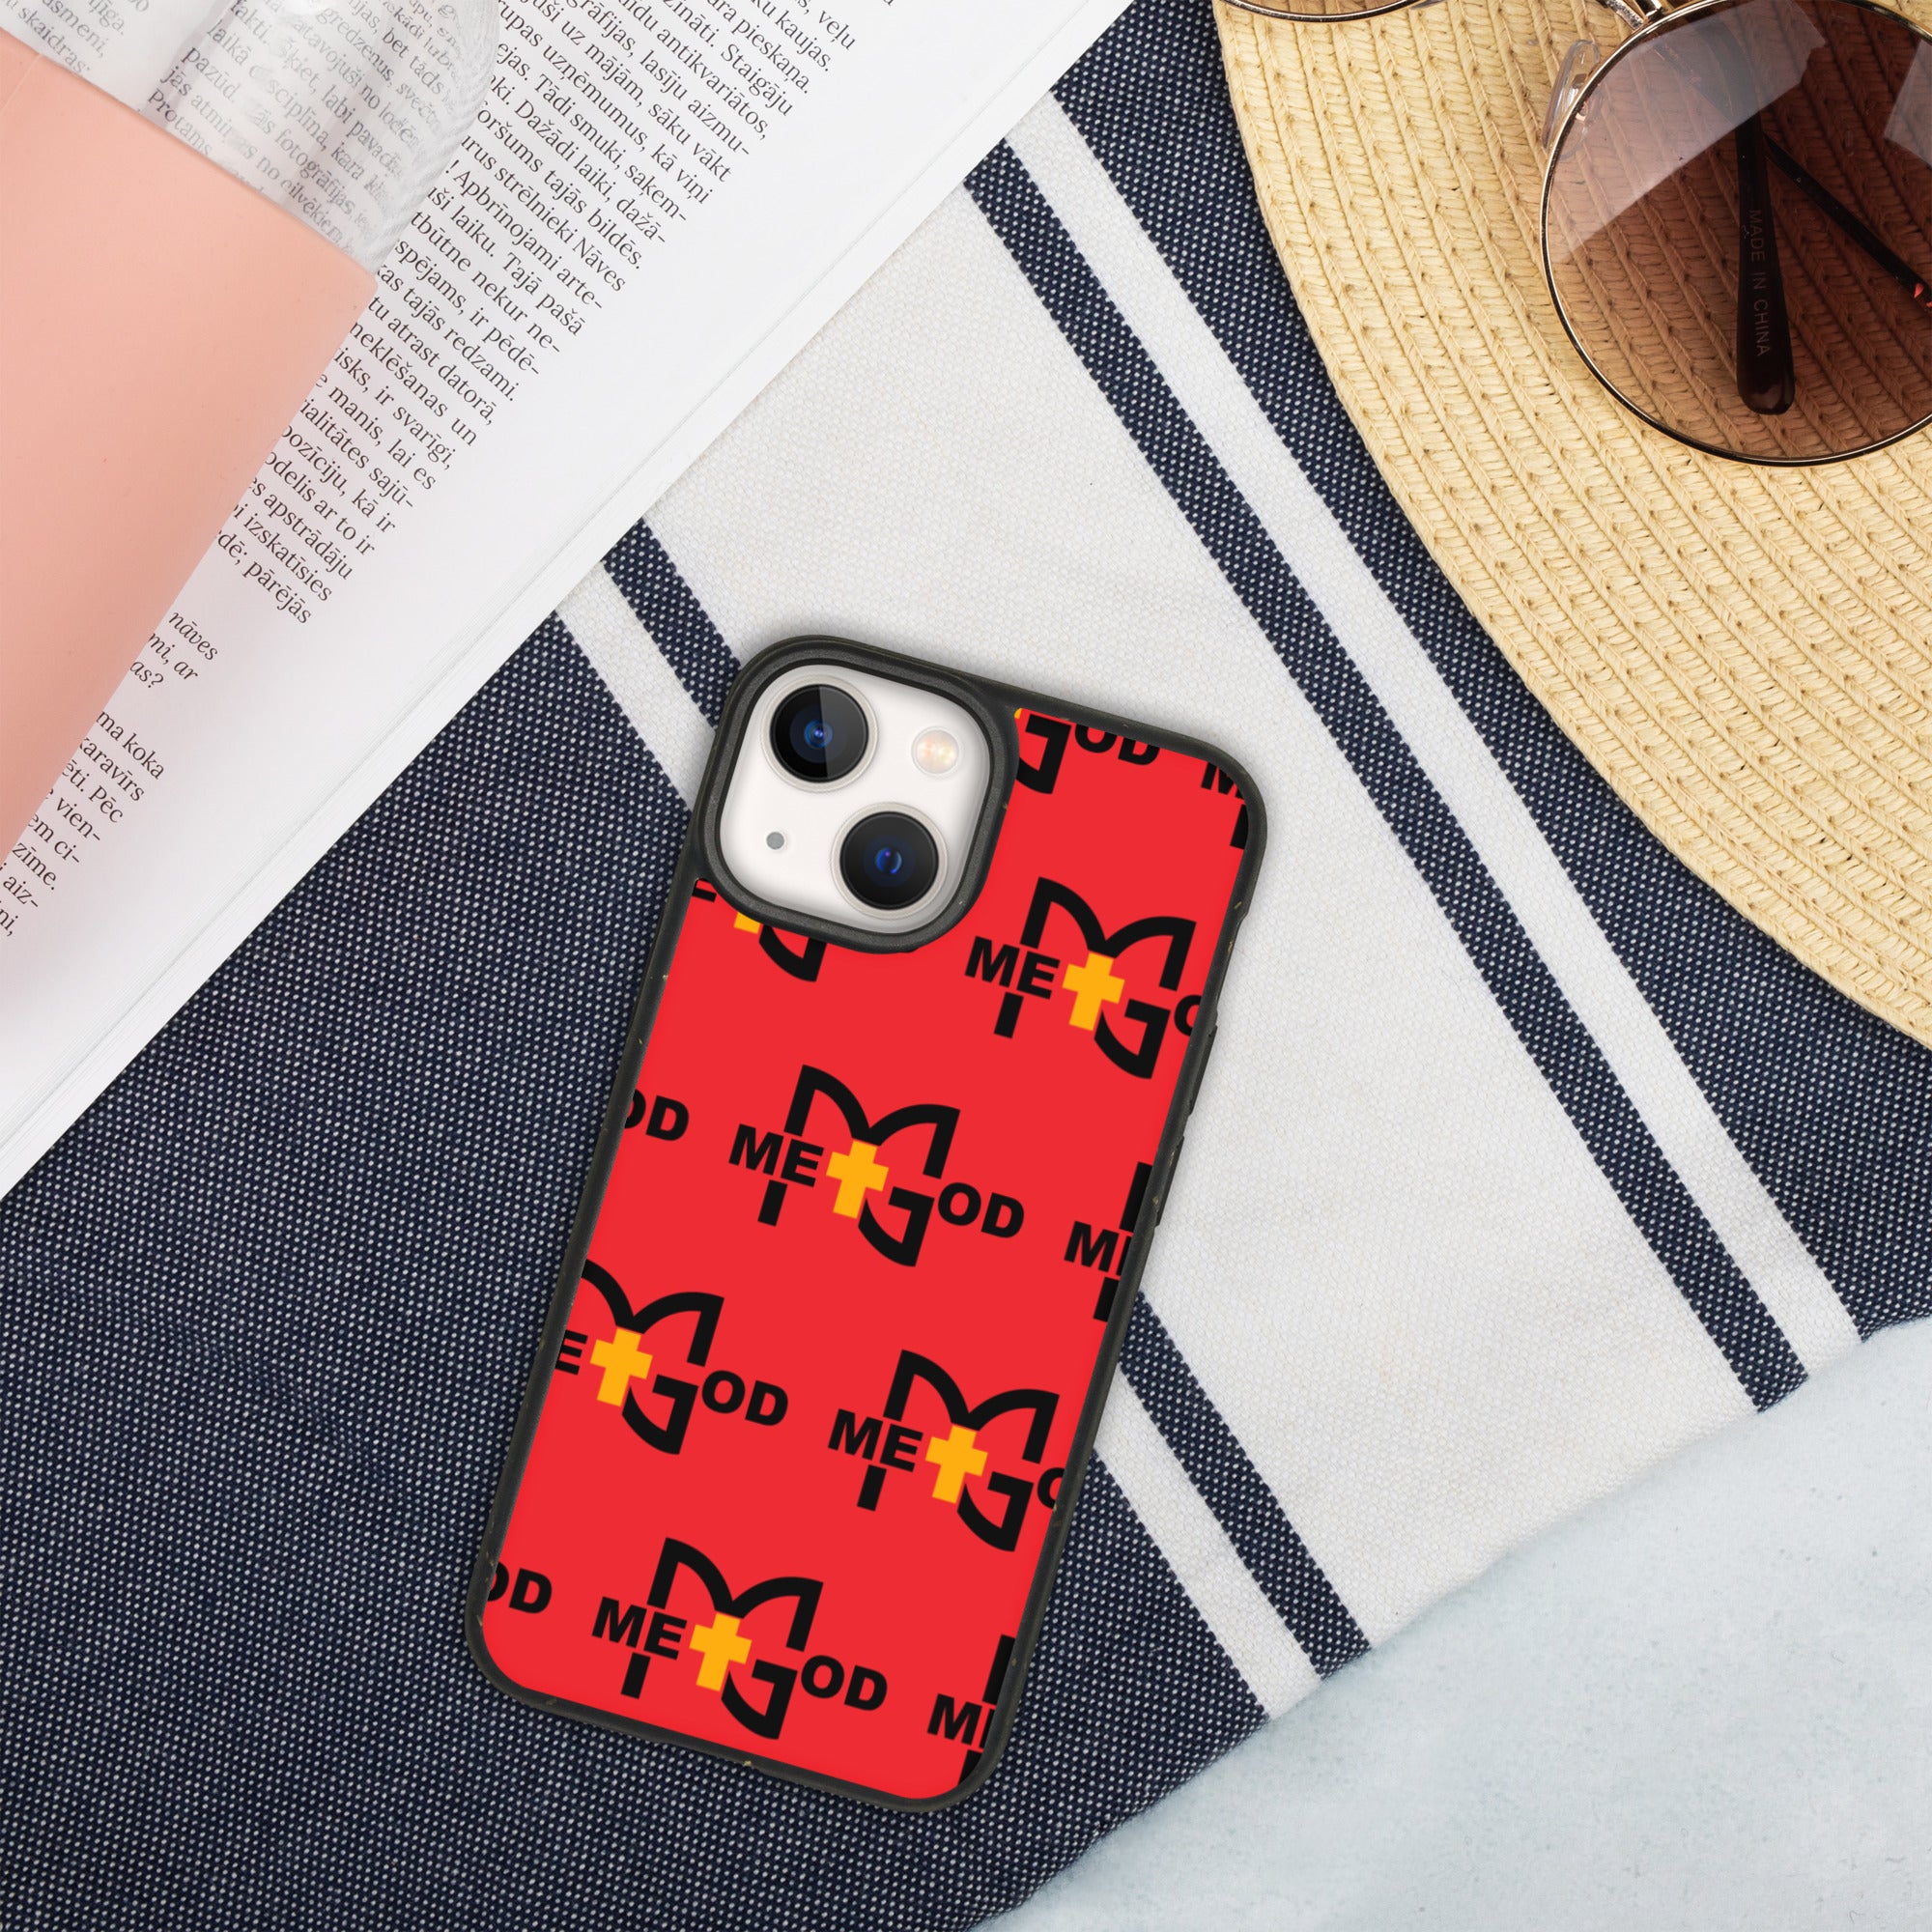 LOUIS VUITTON LV LOGO PATTERN RED iPhone 8 Plus Case Cover